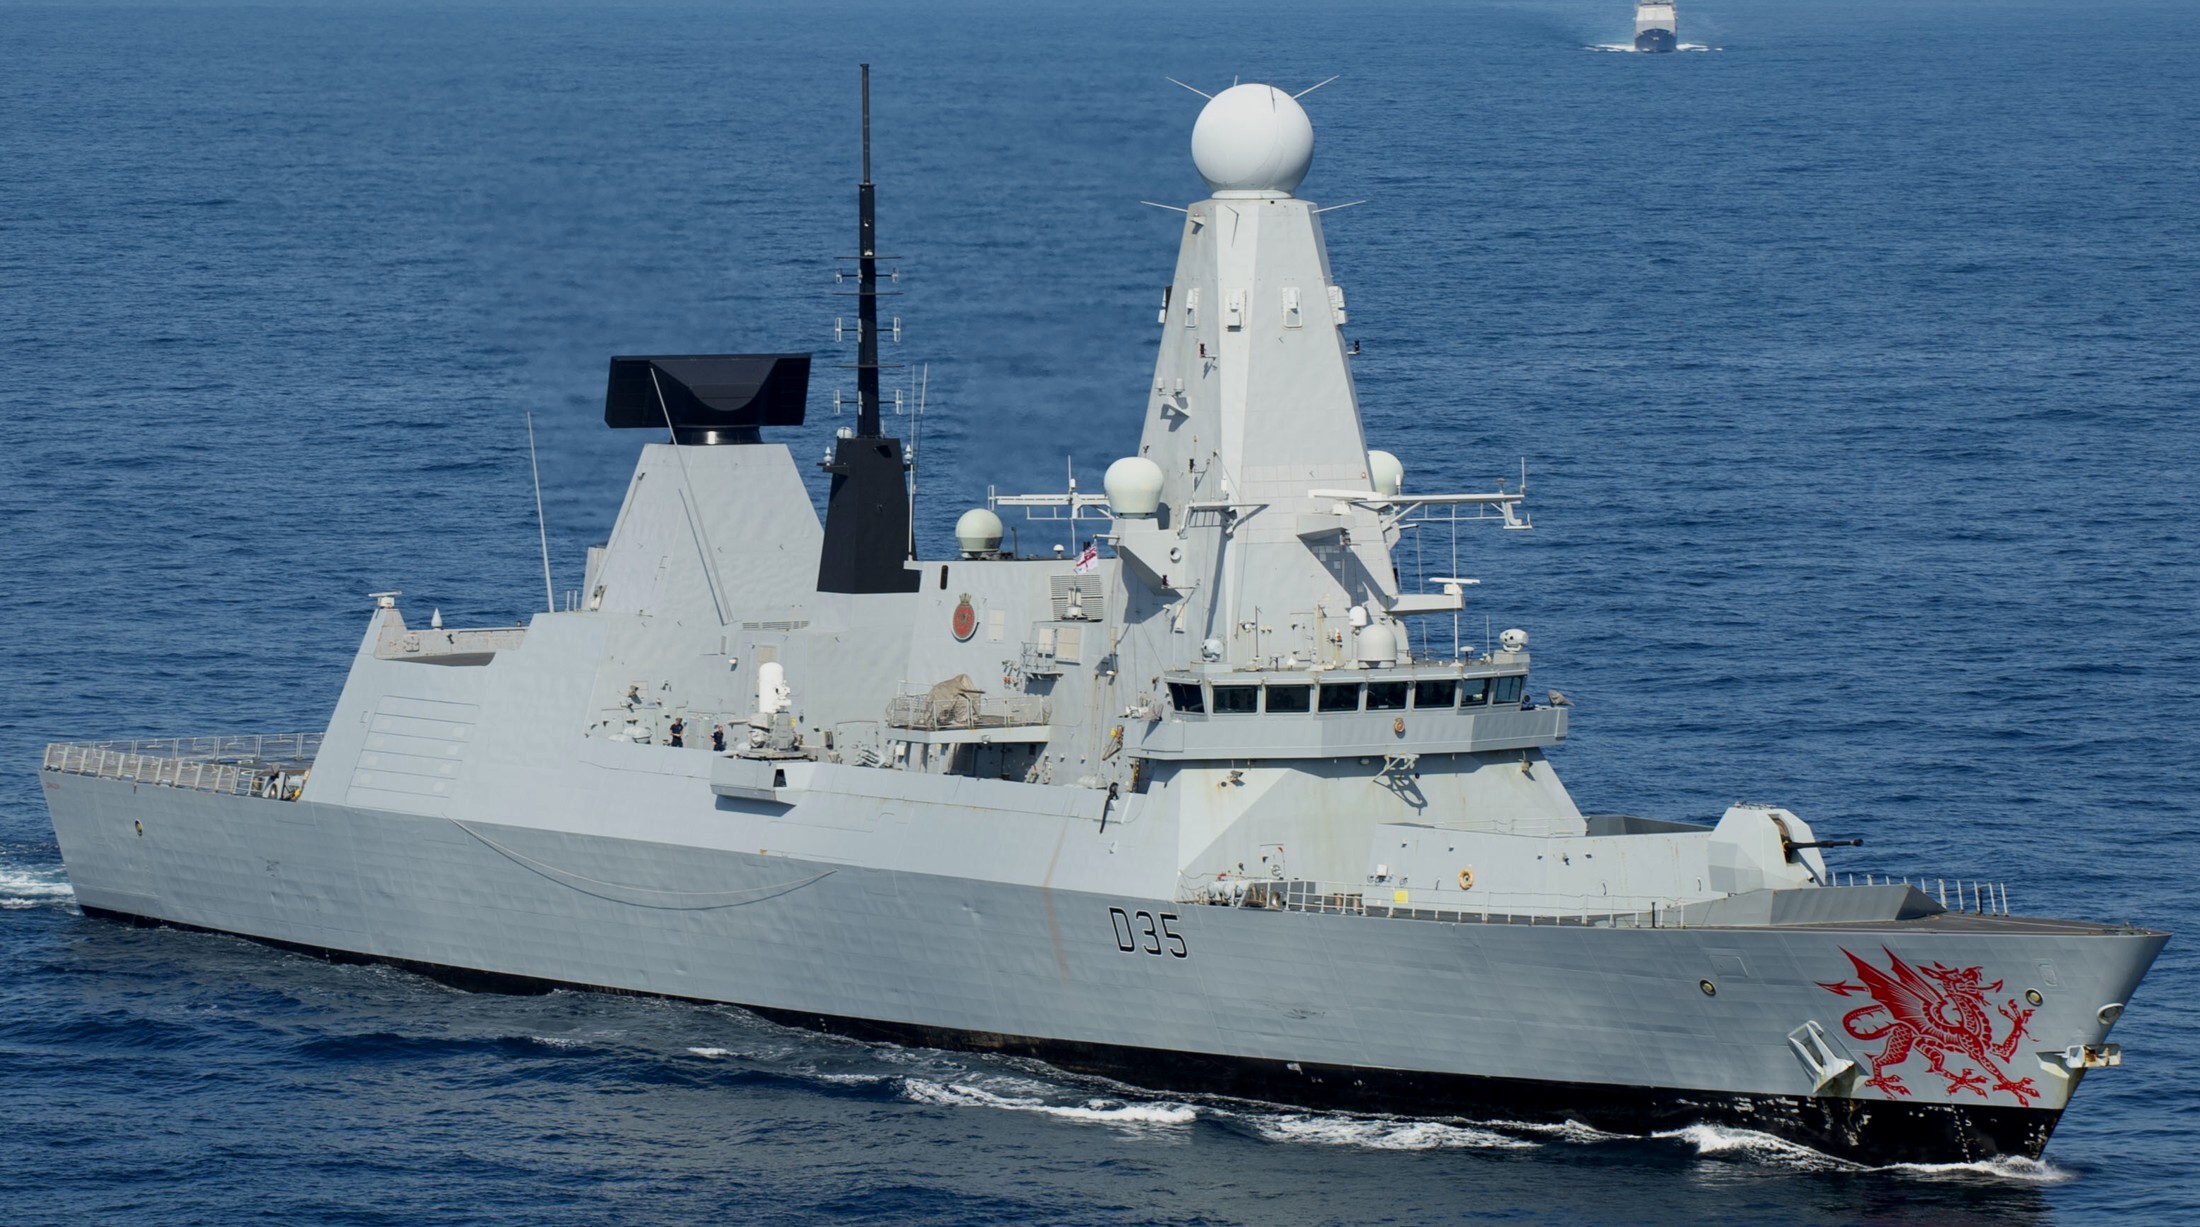 hms dragon d-35 type 45 daring class guided missile destroyer ddg royal navy sea viper paams 30